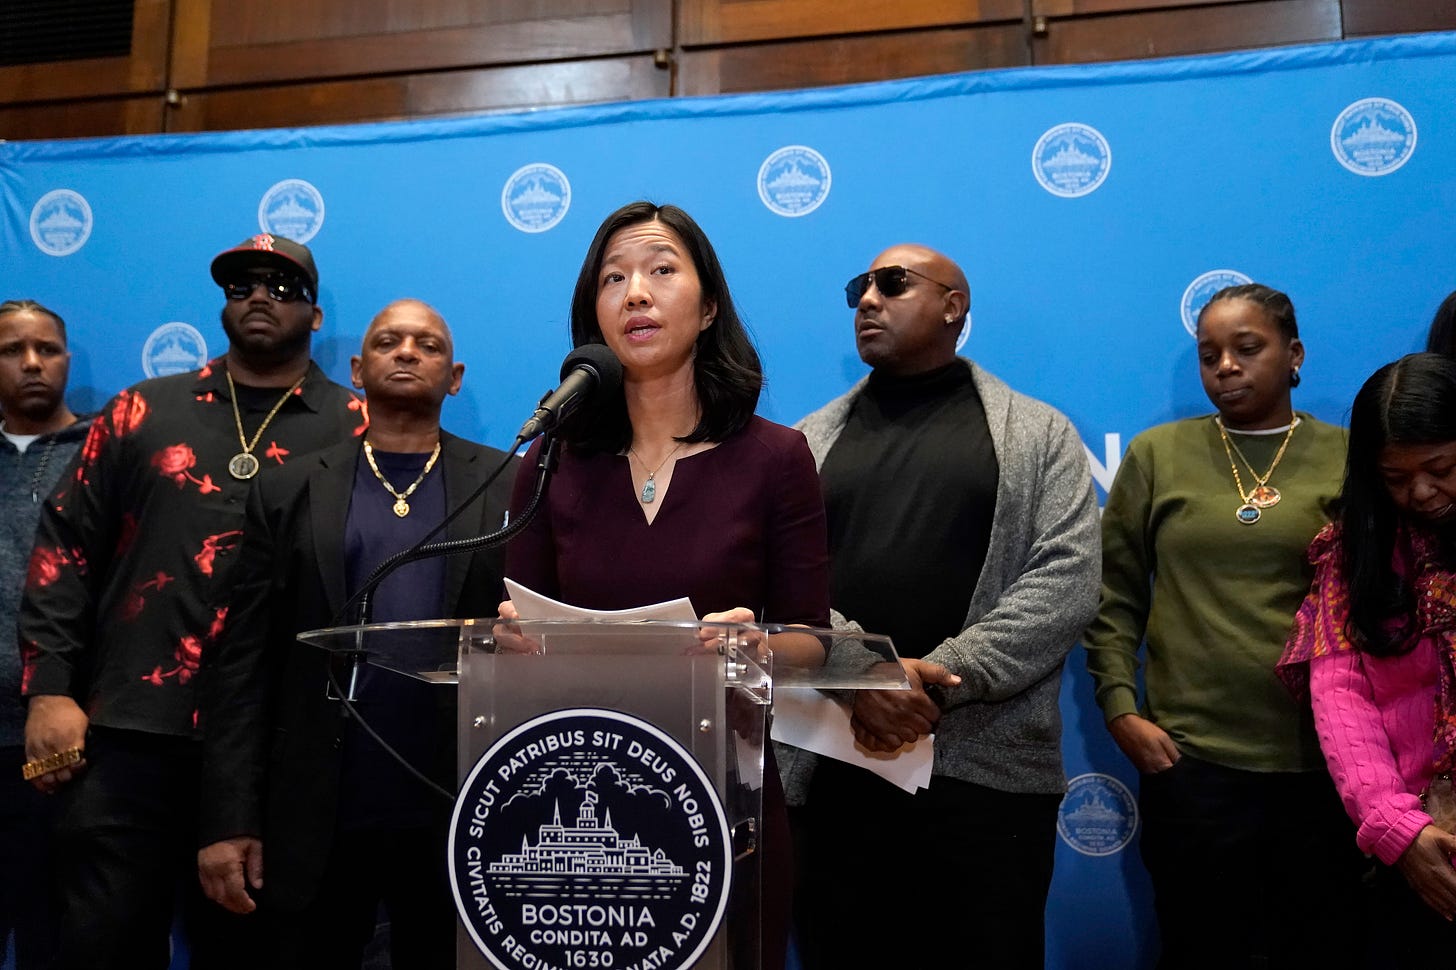 Boston Mayor Michelle Wu issues a formal apology to Alan Swanson and Willie Bennett.